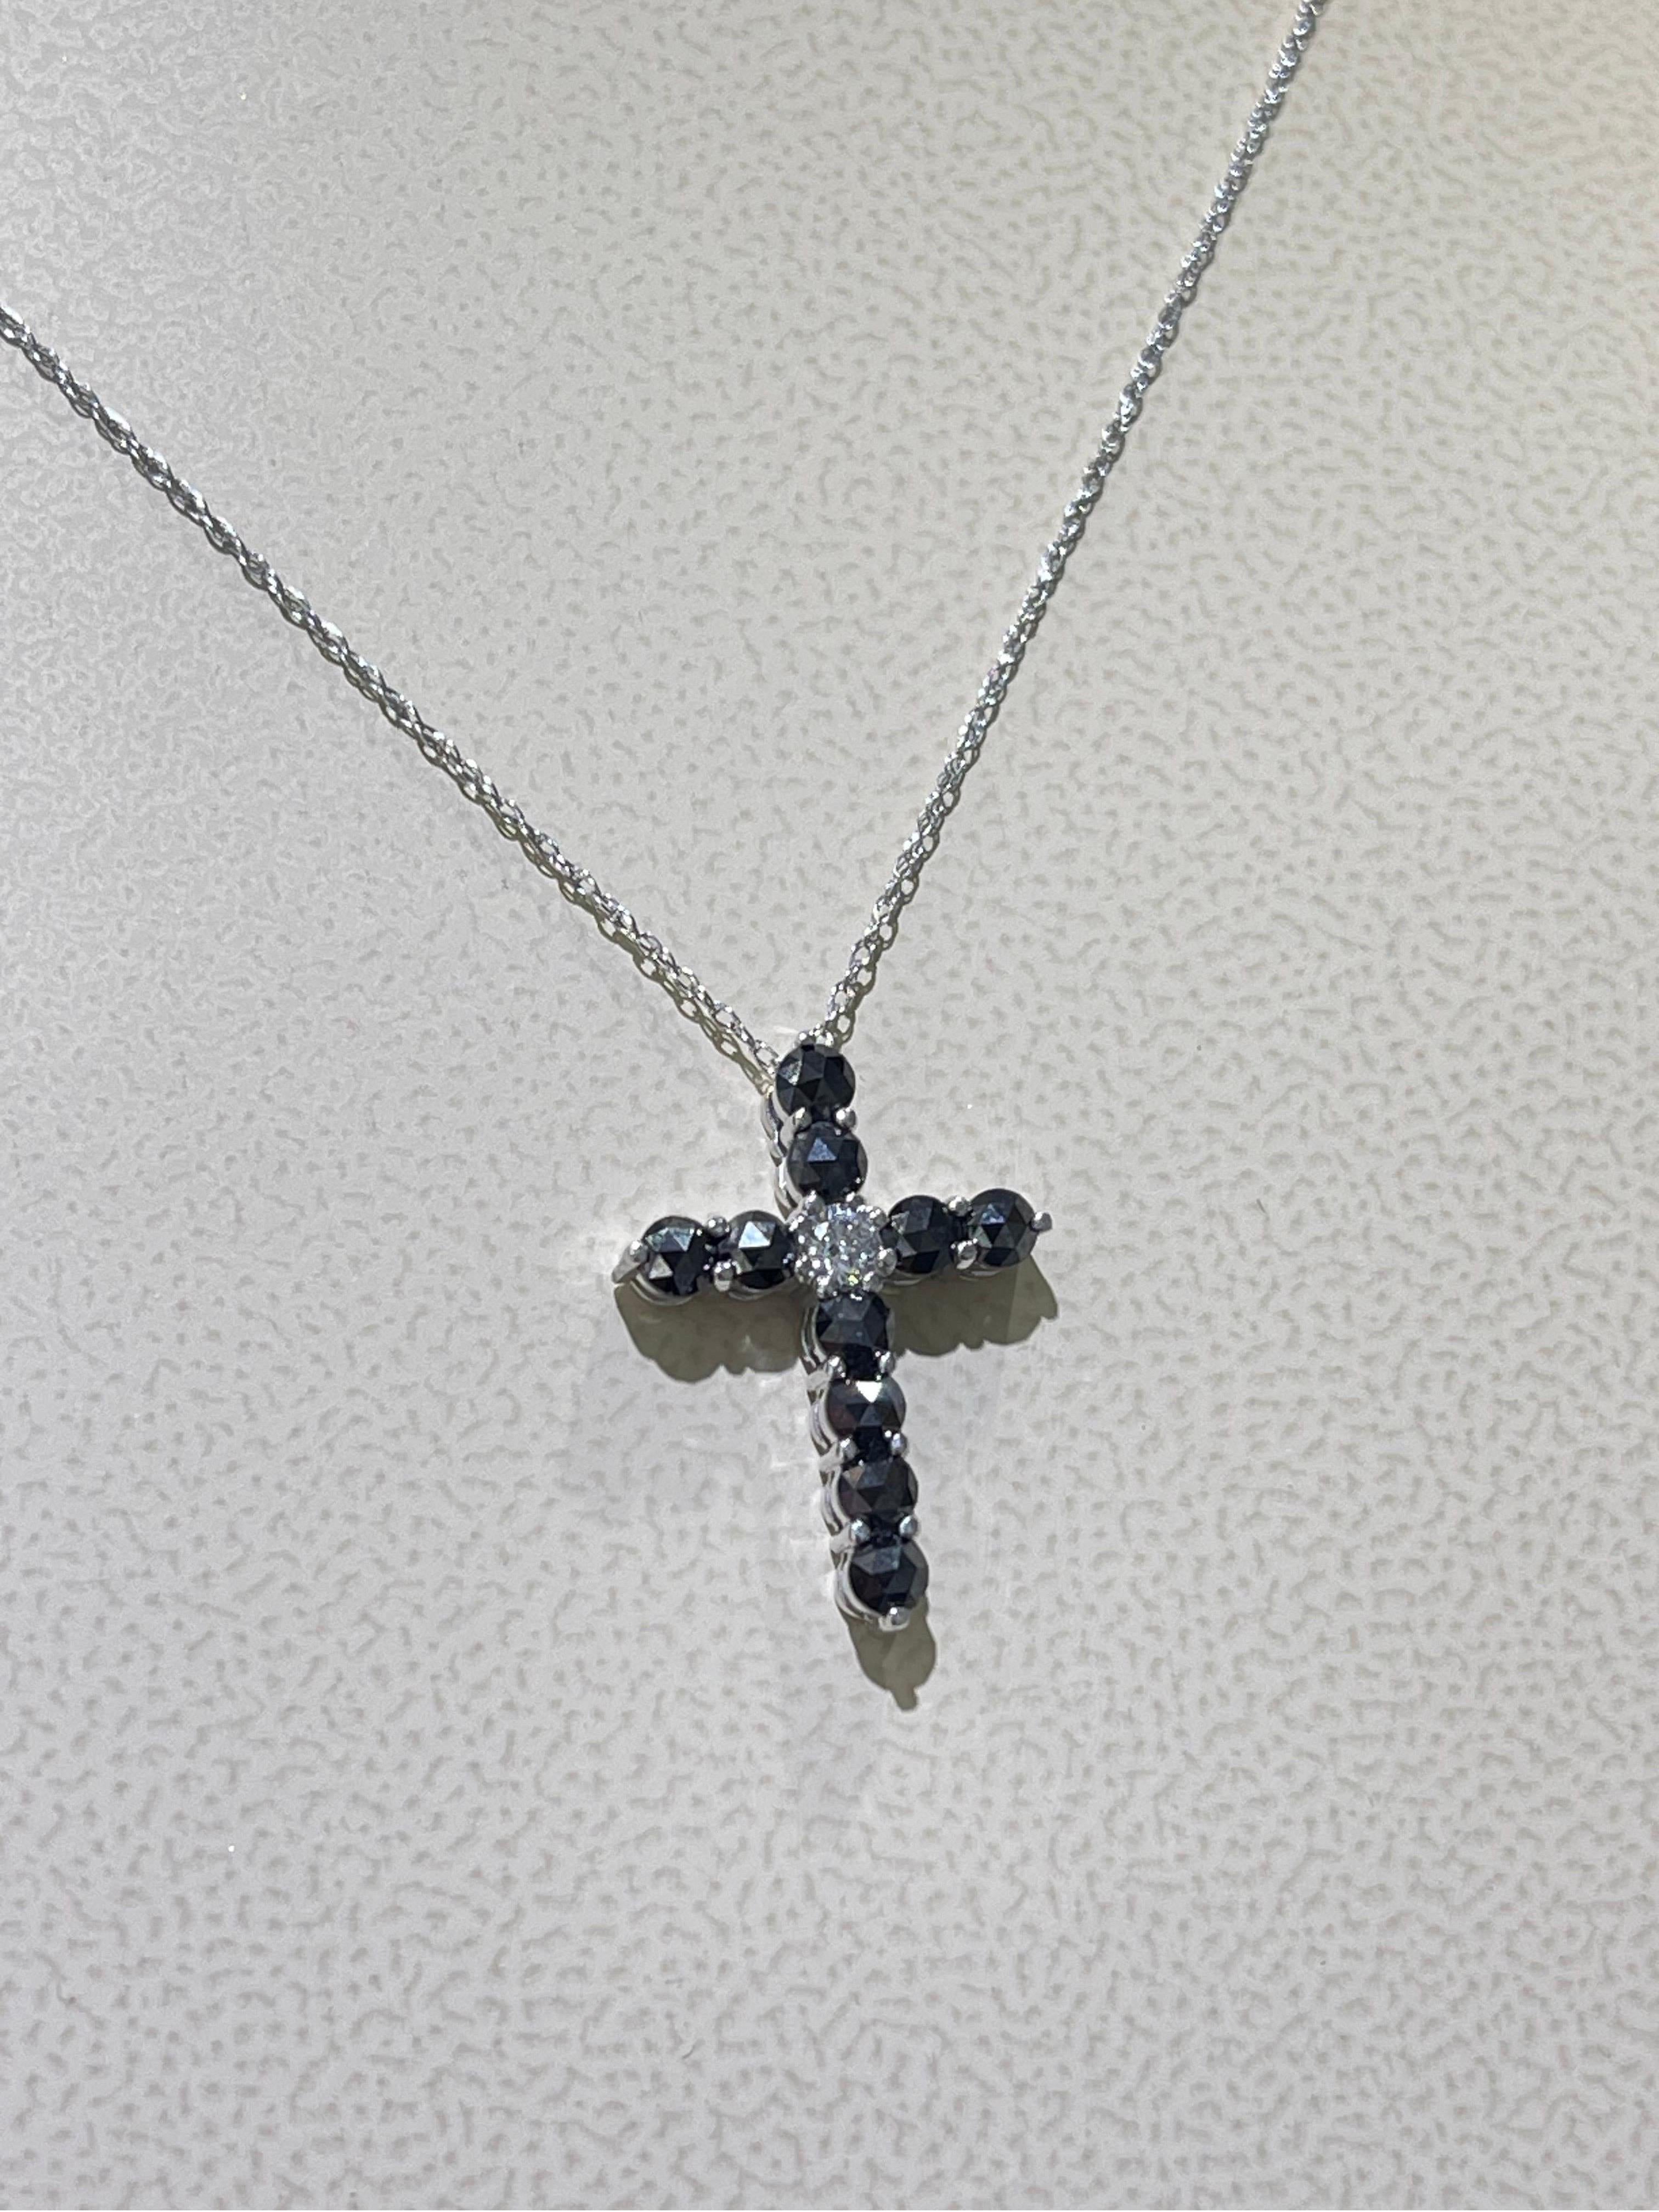 Diamond Cross Necklace In 18k White Gold,

- 1 carat total black & white diamonds weight,

- length of the necklace is 18”,

- cross dimensions 7/8” x 5/8”